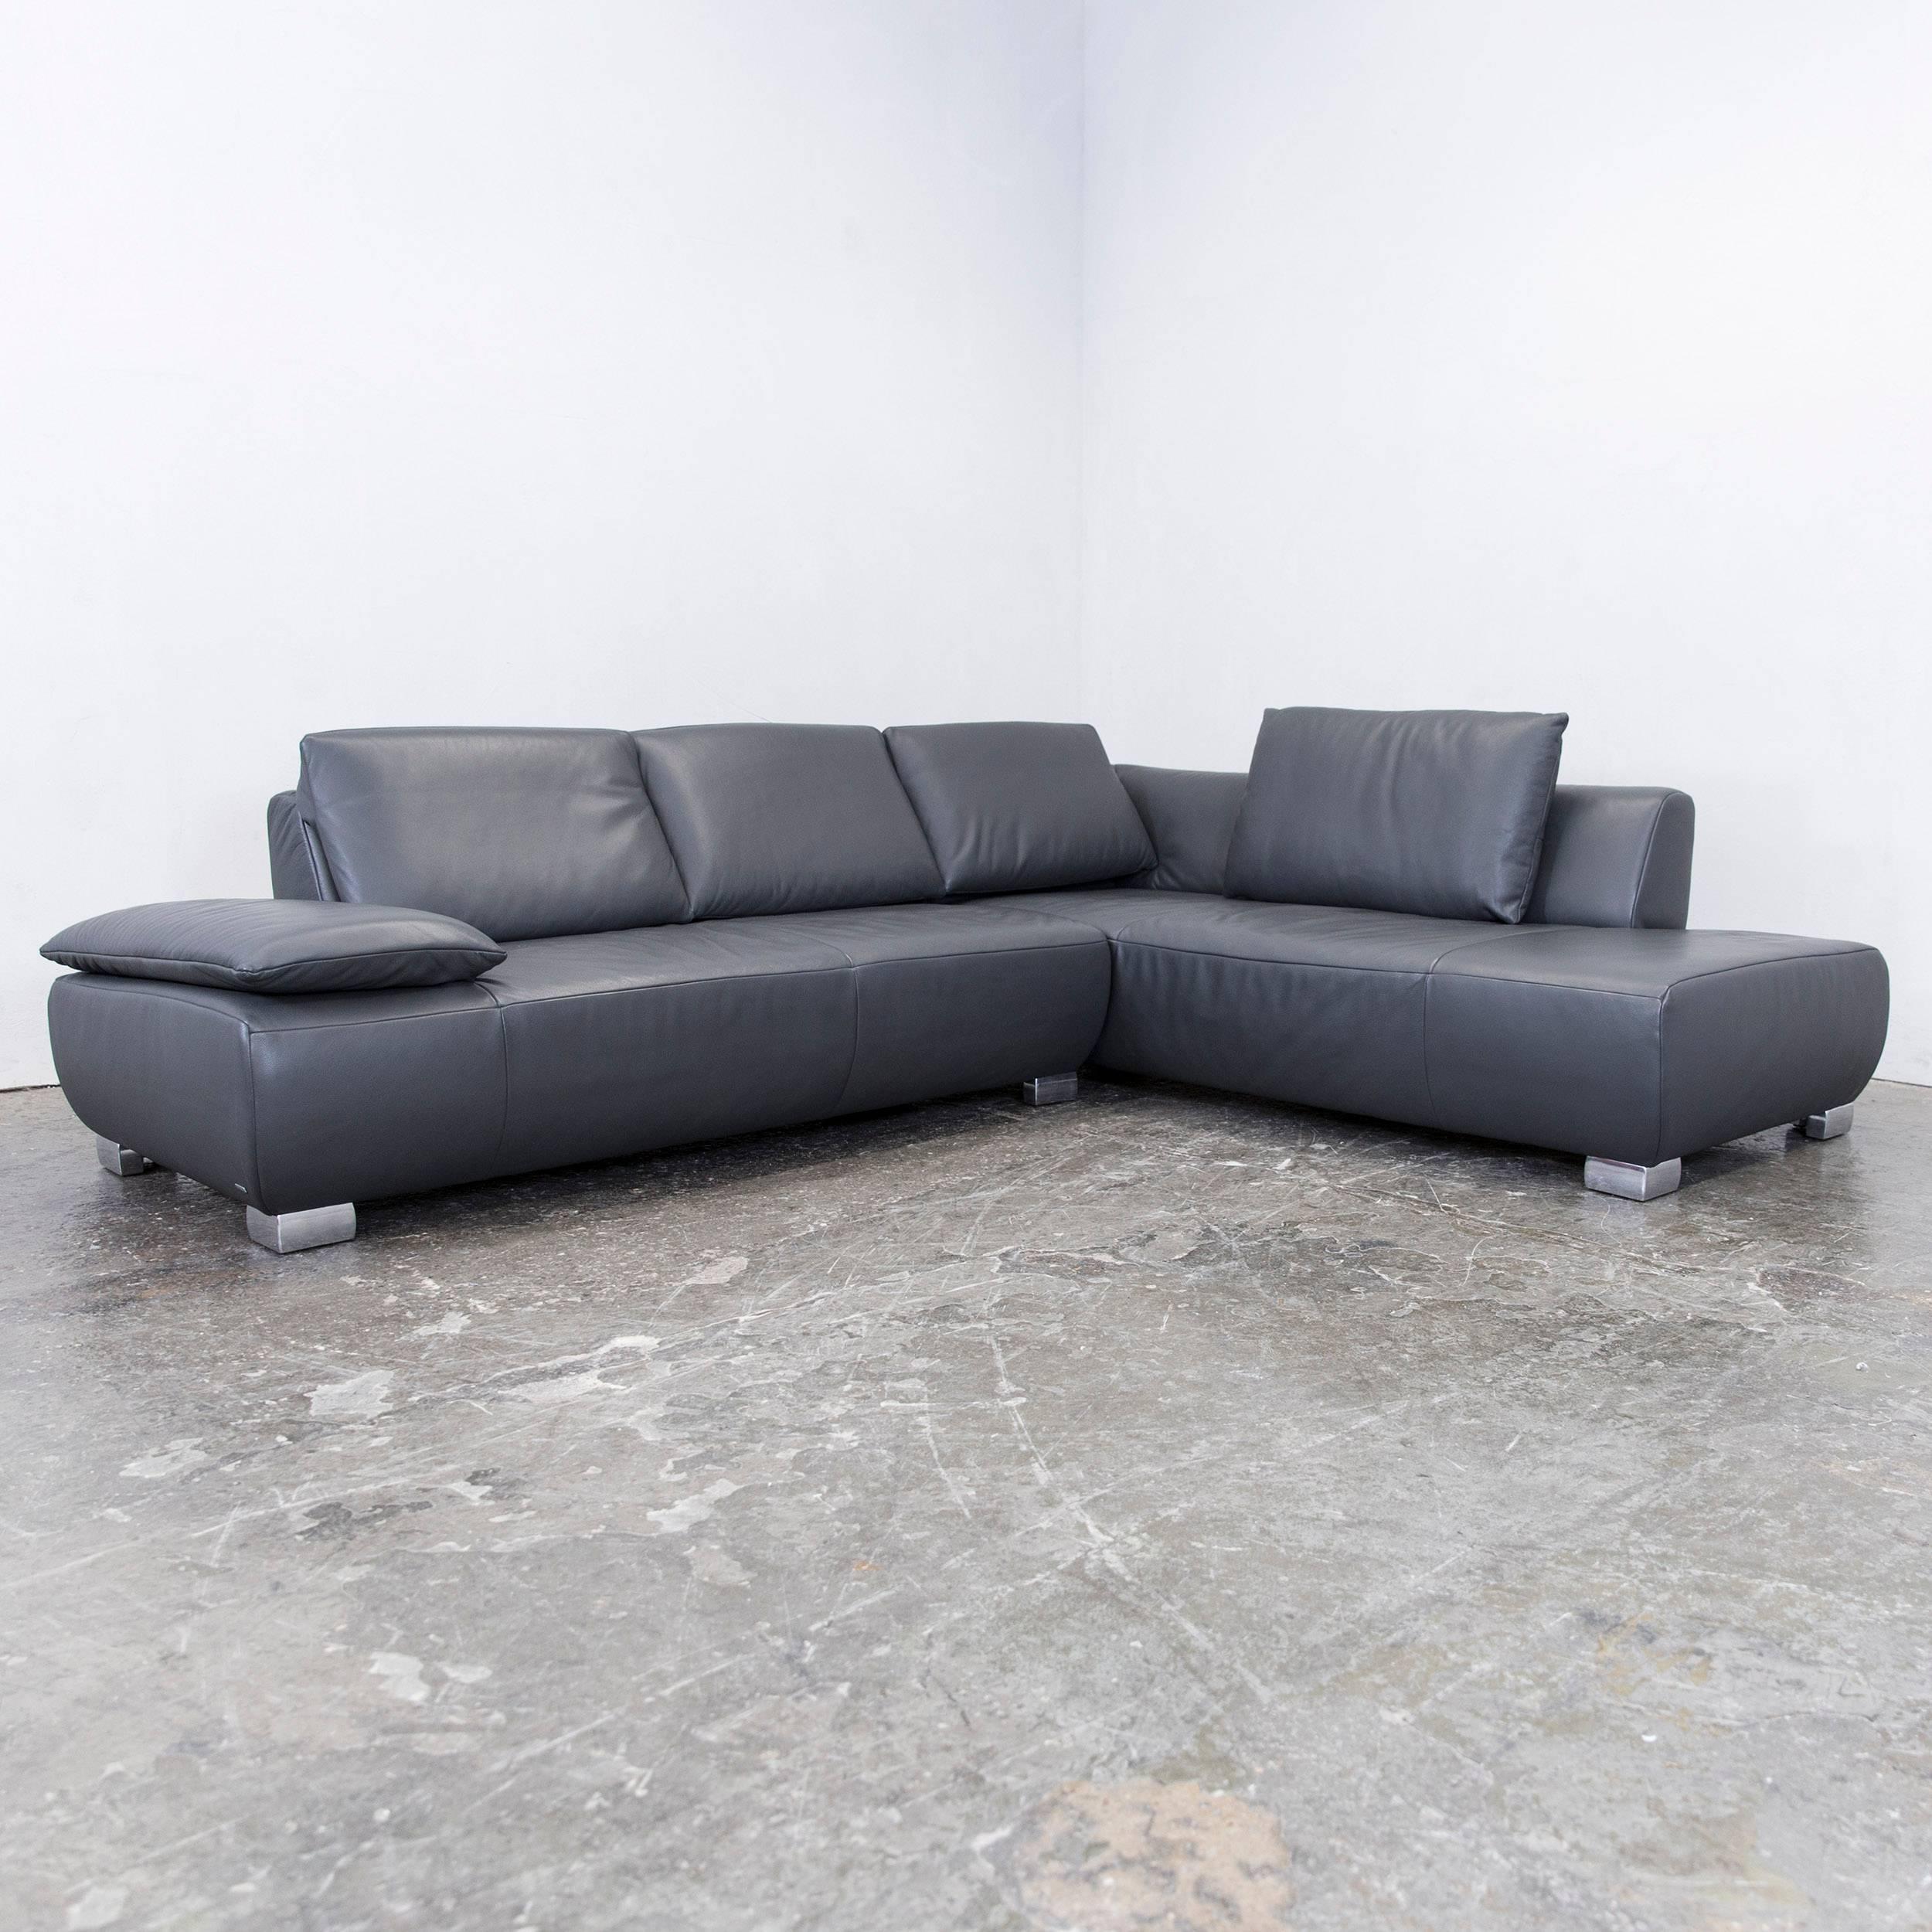 Grey colored original Koinor Volare designer corner sofa in a minimalistic and modern design, with convenient functions, made for pure comfort and flexibility.